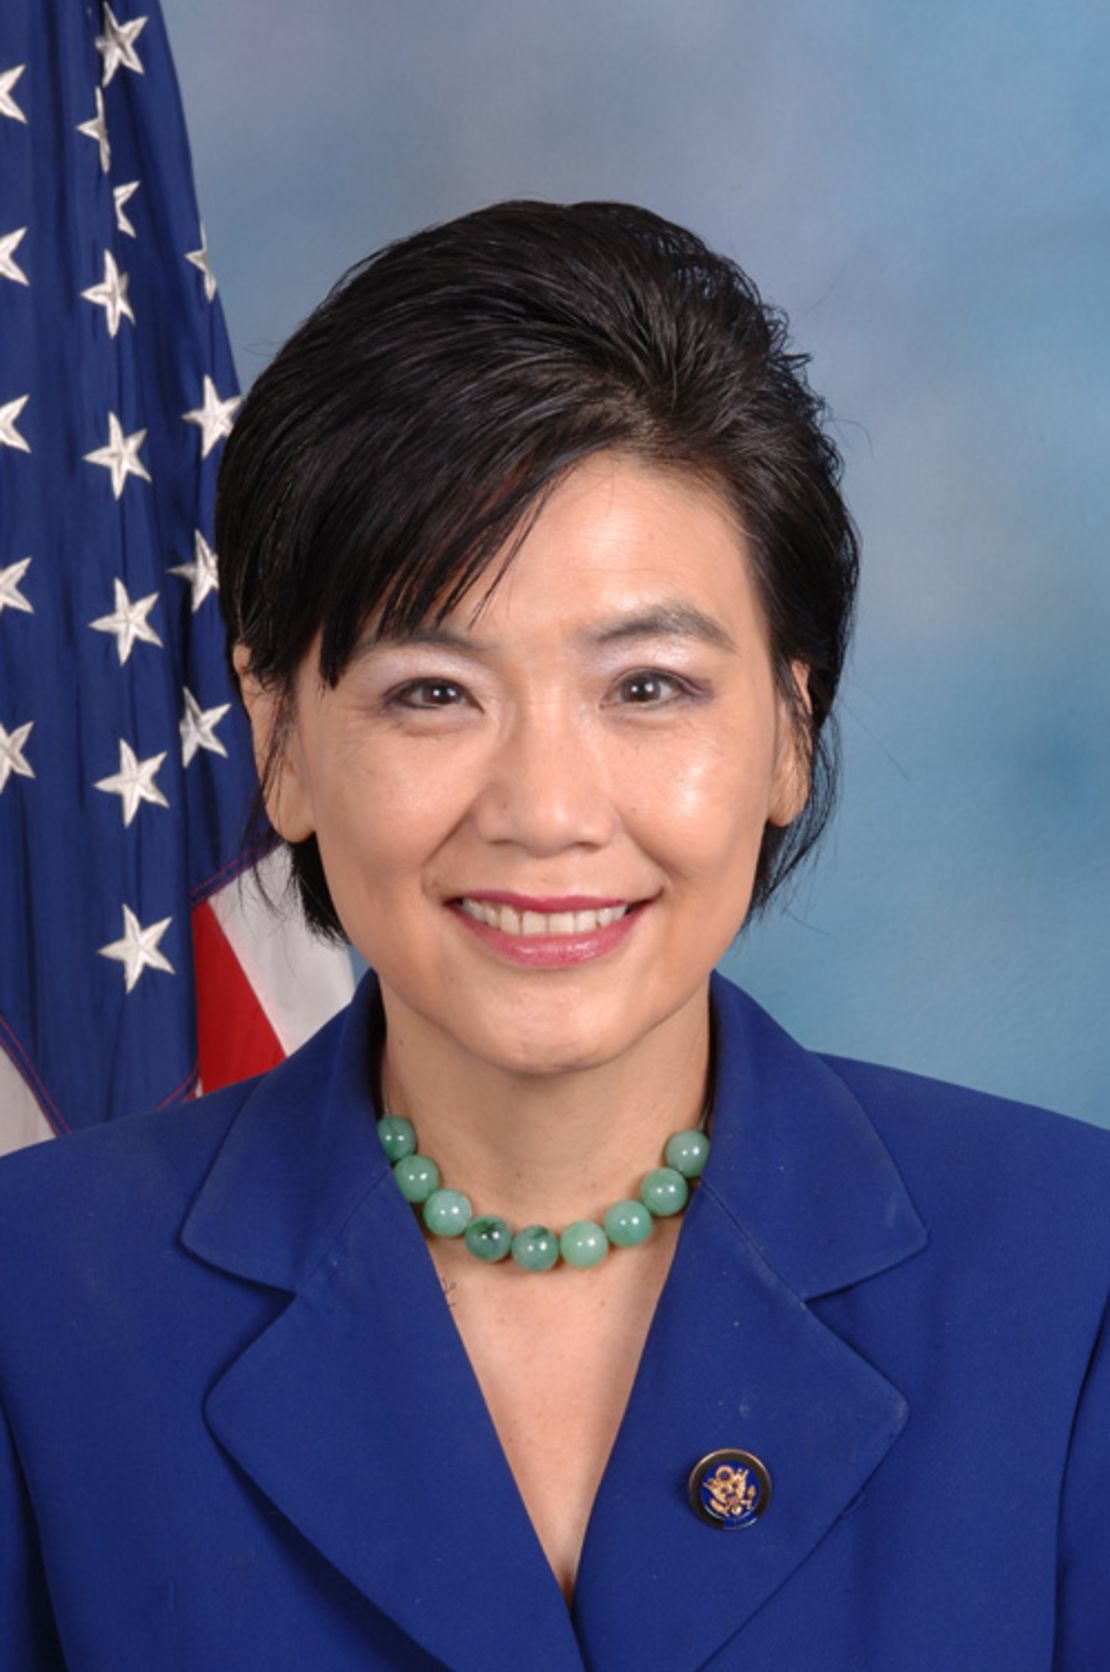 U.S. Rep. Judy Chu, D-California, became the first Chinese-American woman elected to Congress in 2009.